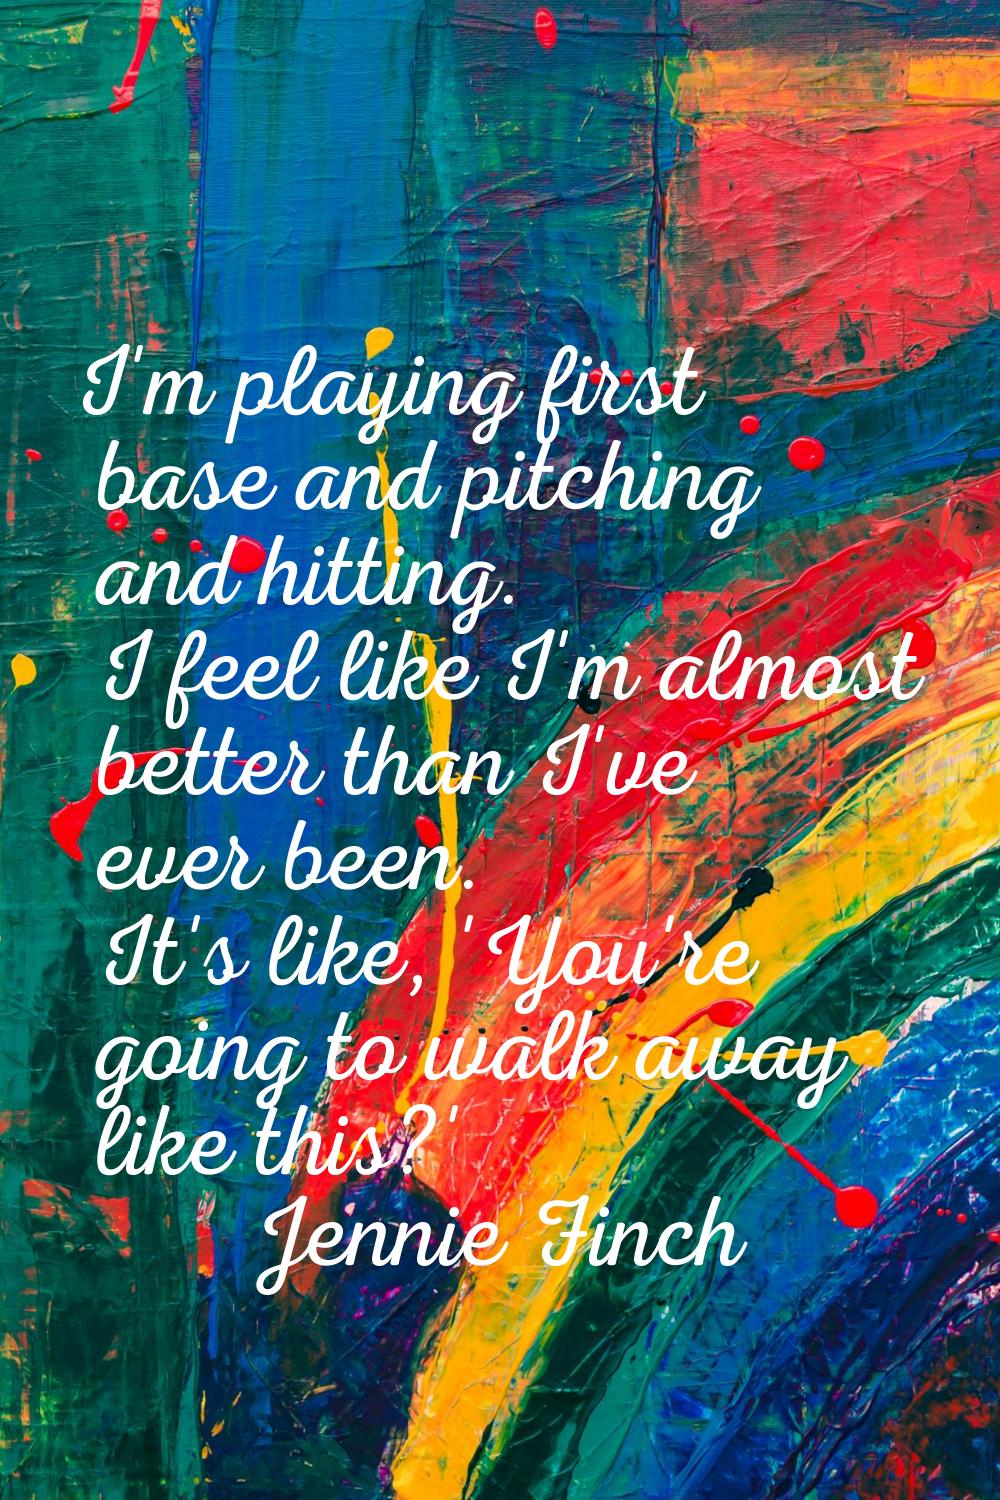 I'm playing first base and pitching and hitting. I feel like I'm almost better than I've ever been.